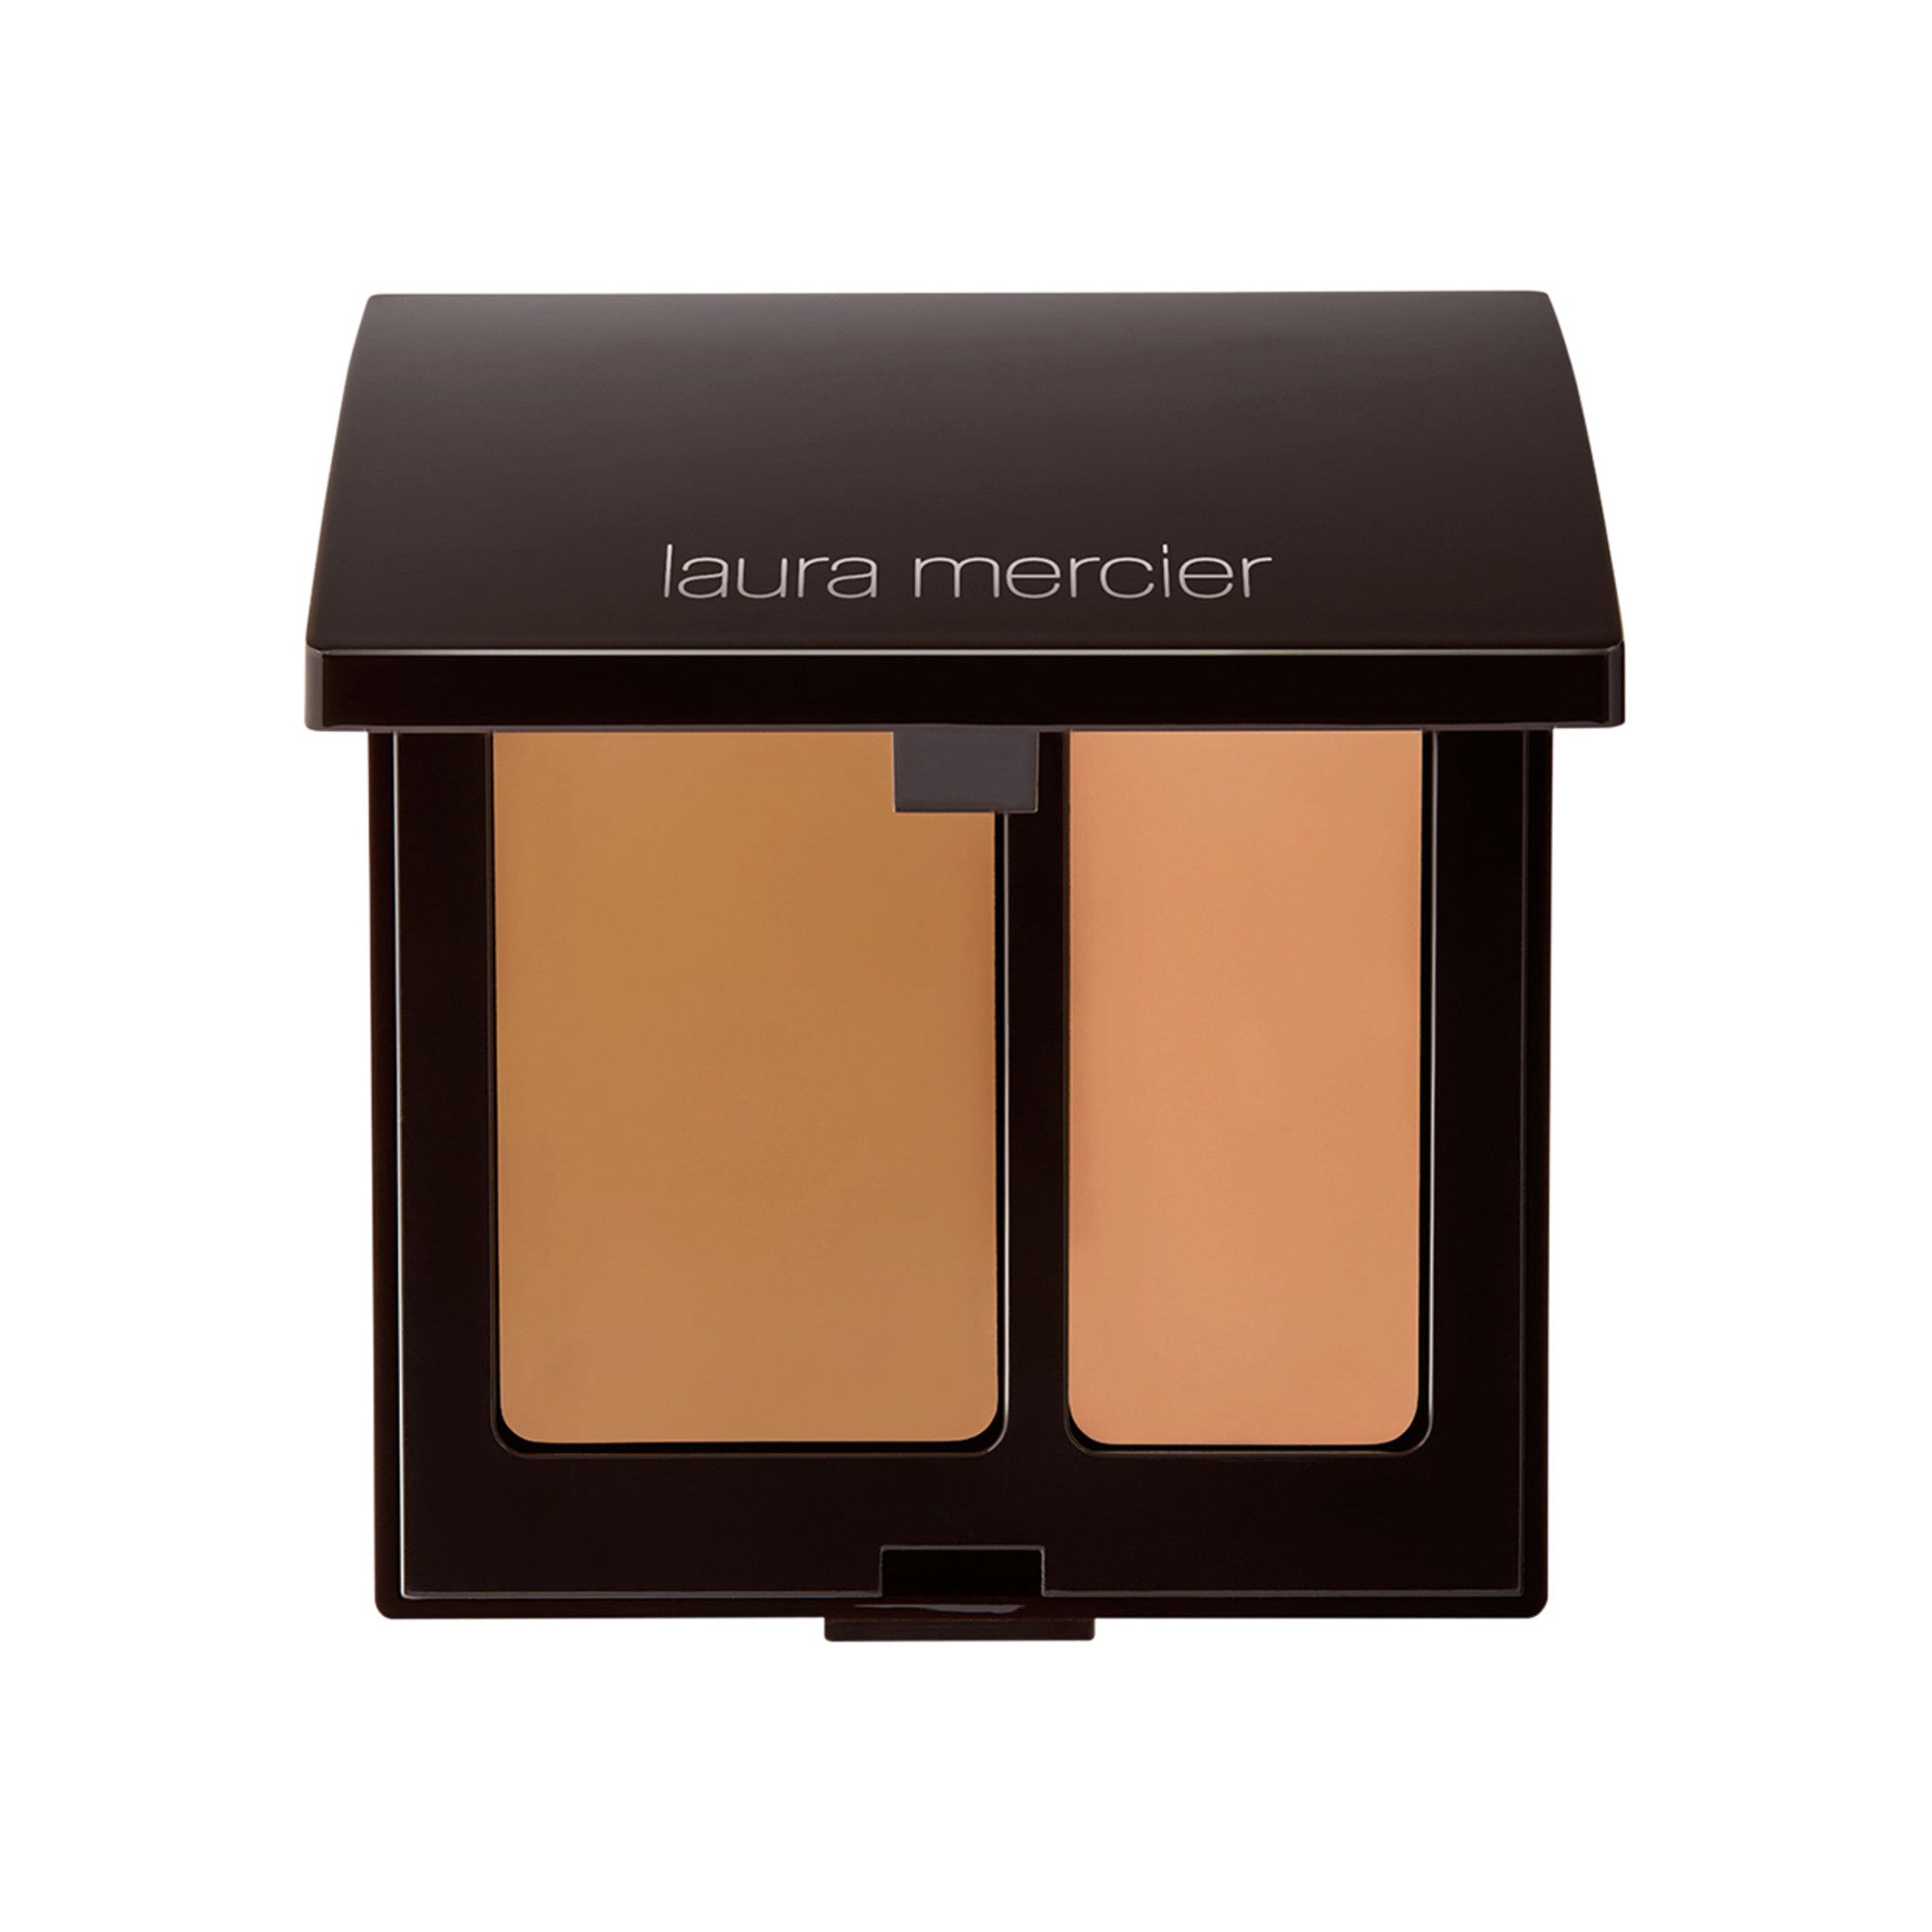 Laura Mercier Secret Camouflage Color/Shade variant: Sc 6 main image. This product is for medium complexions